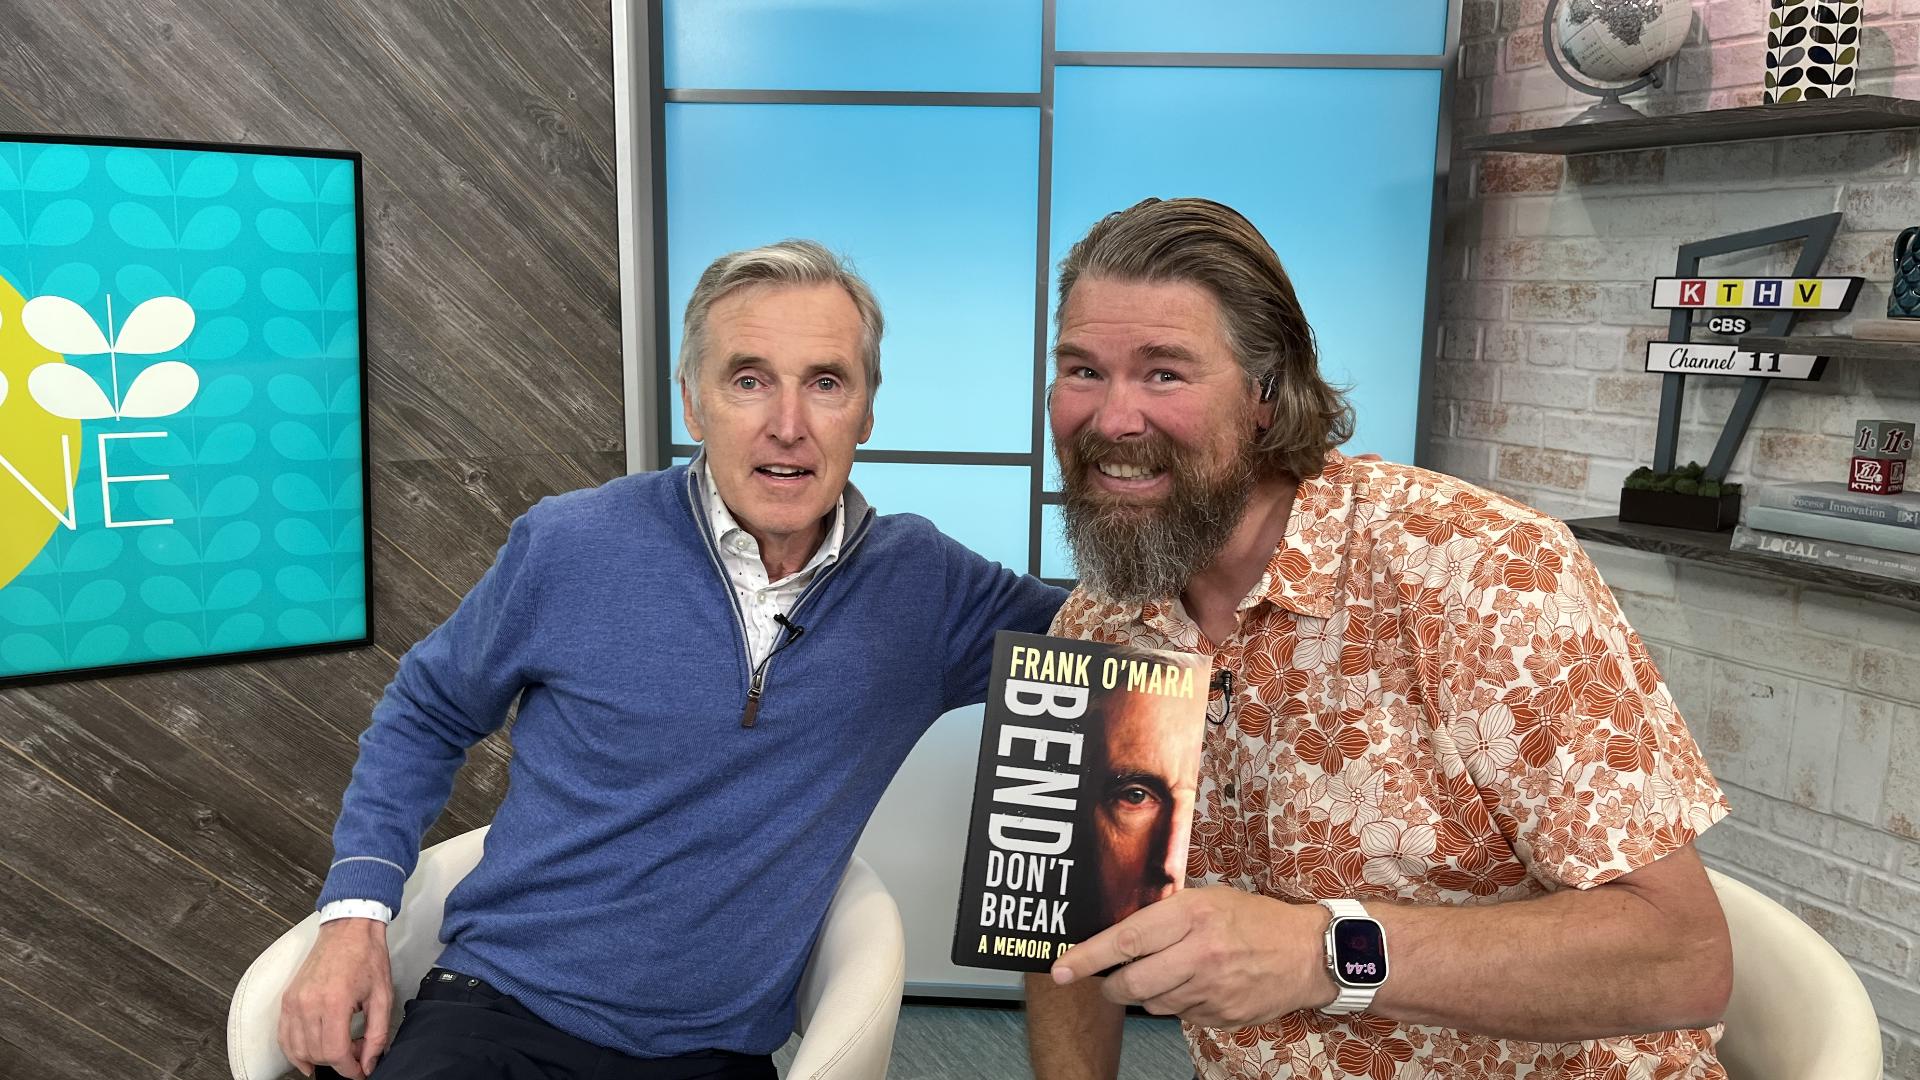 Frank O'Mara details his battle with Parkinson's in new book and shares how this disease has not stopped him from doing things like climbing the South Pole.